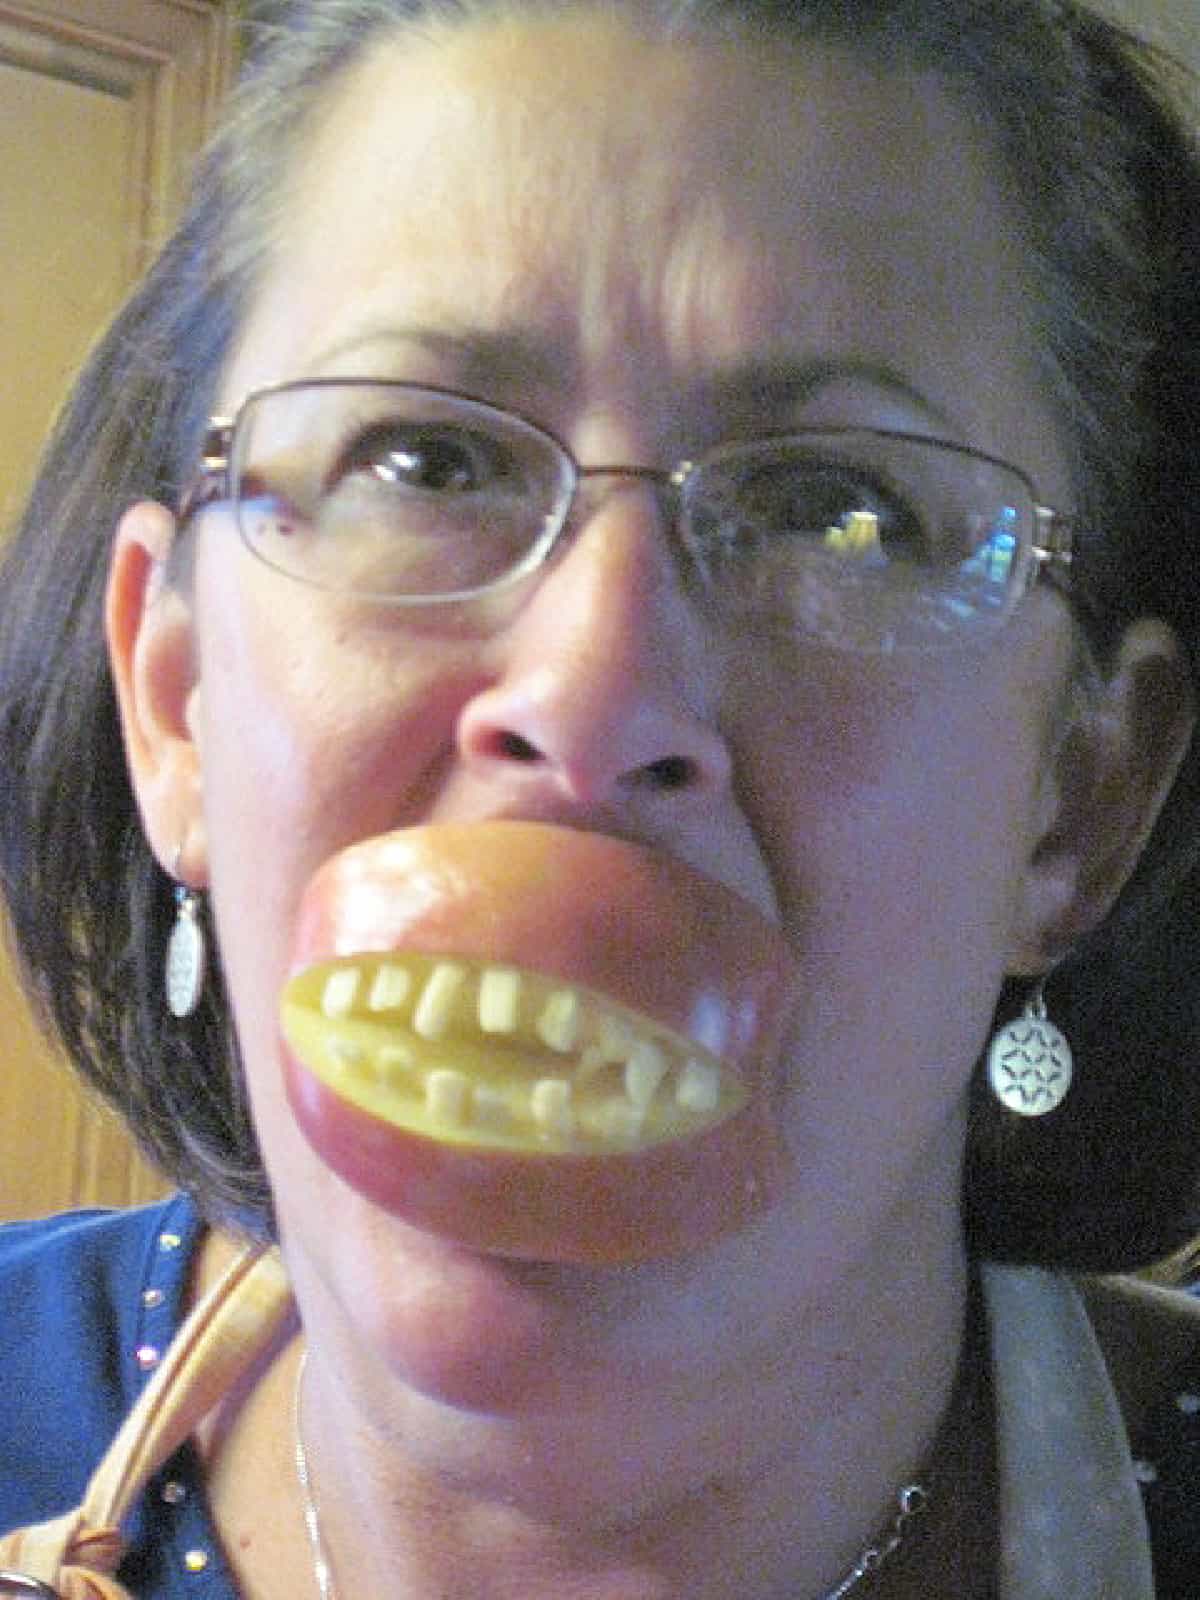 A funny picture of a woman wearing Ghoulish Teeth Apple Snacks with almond pieces.